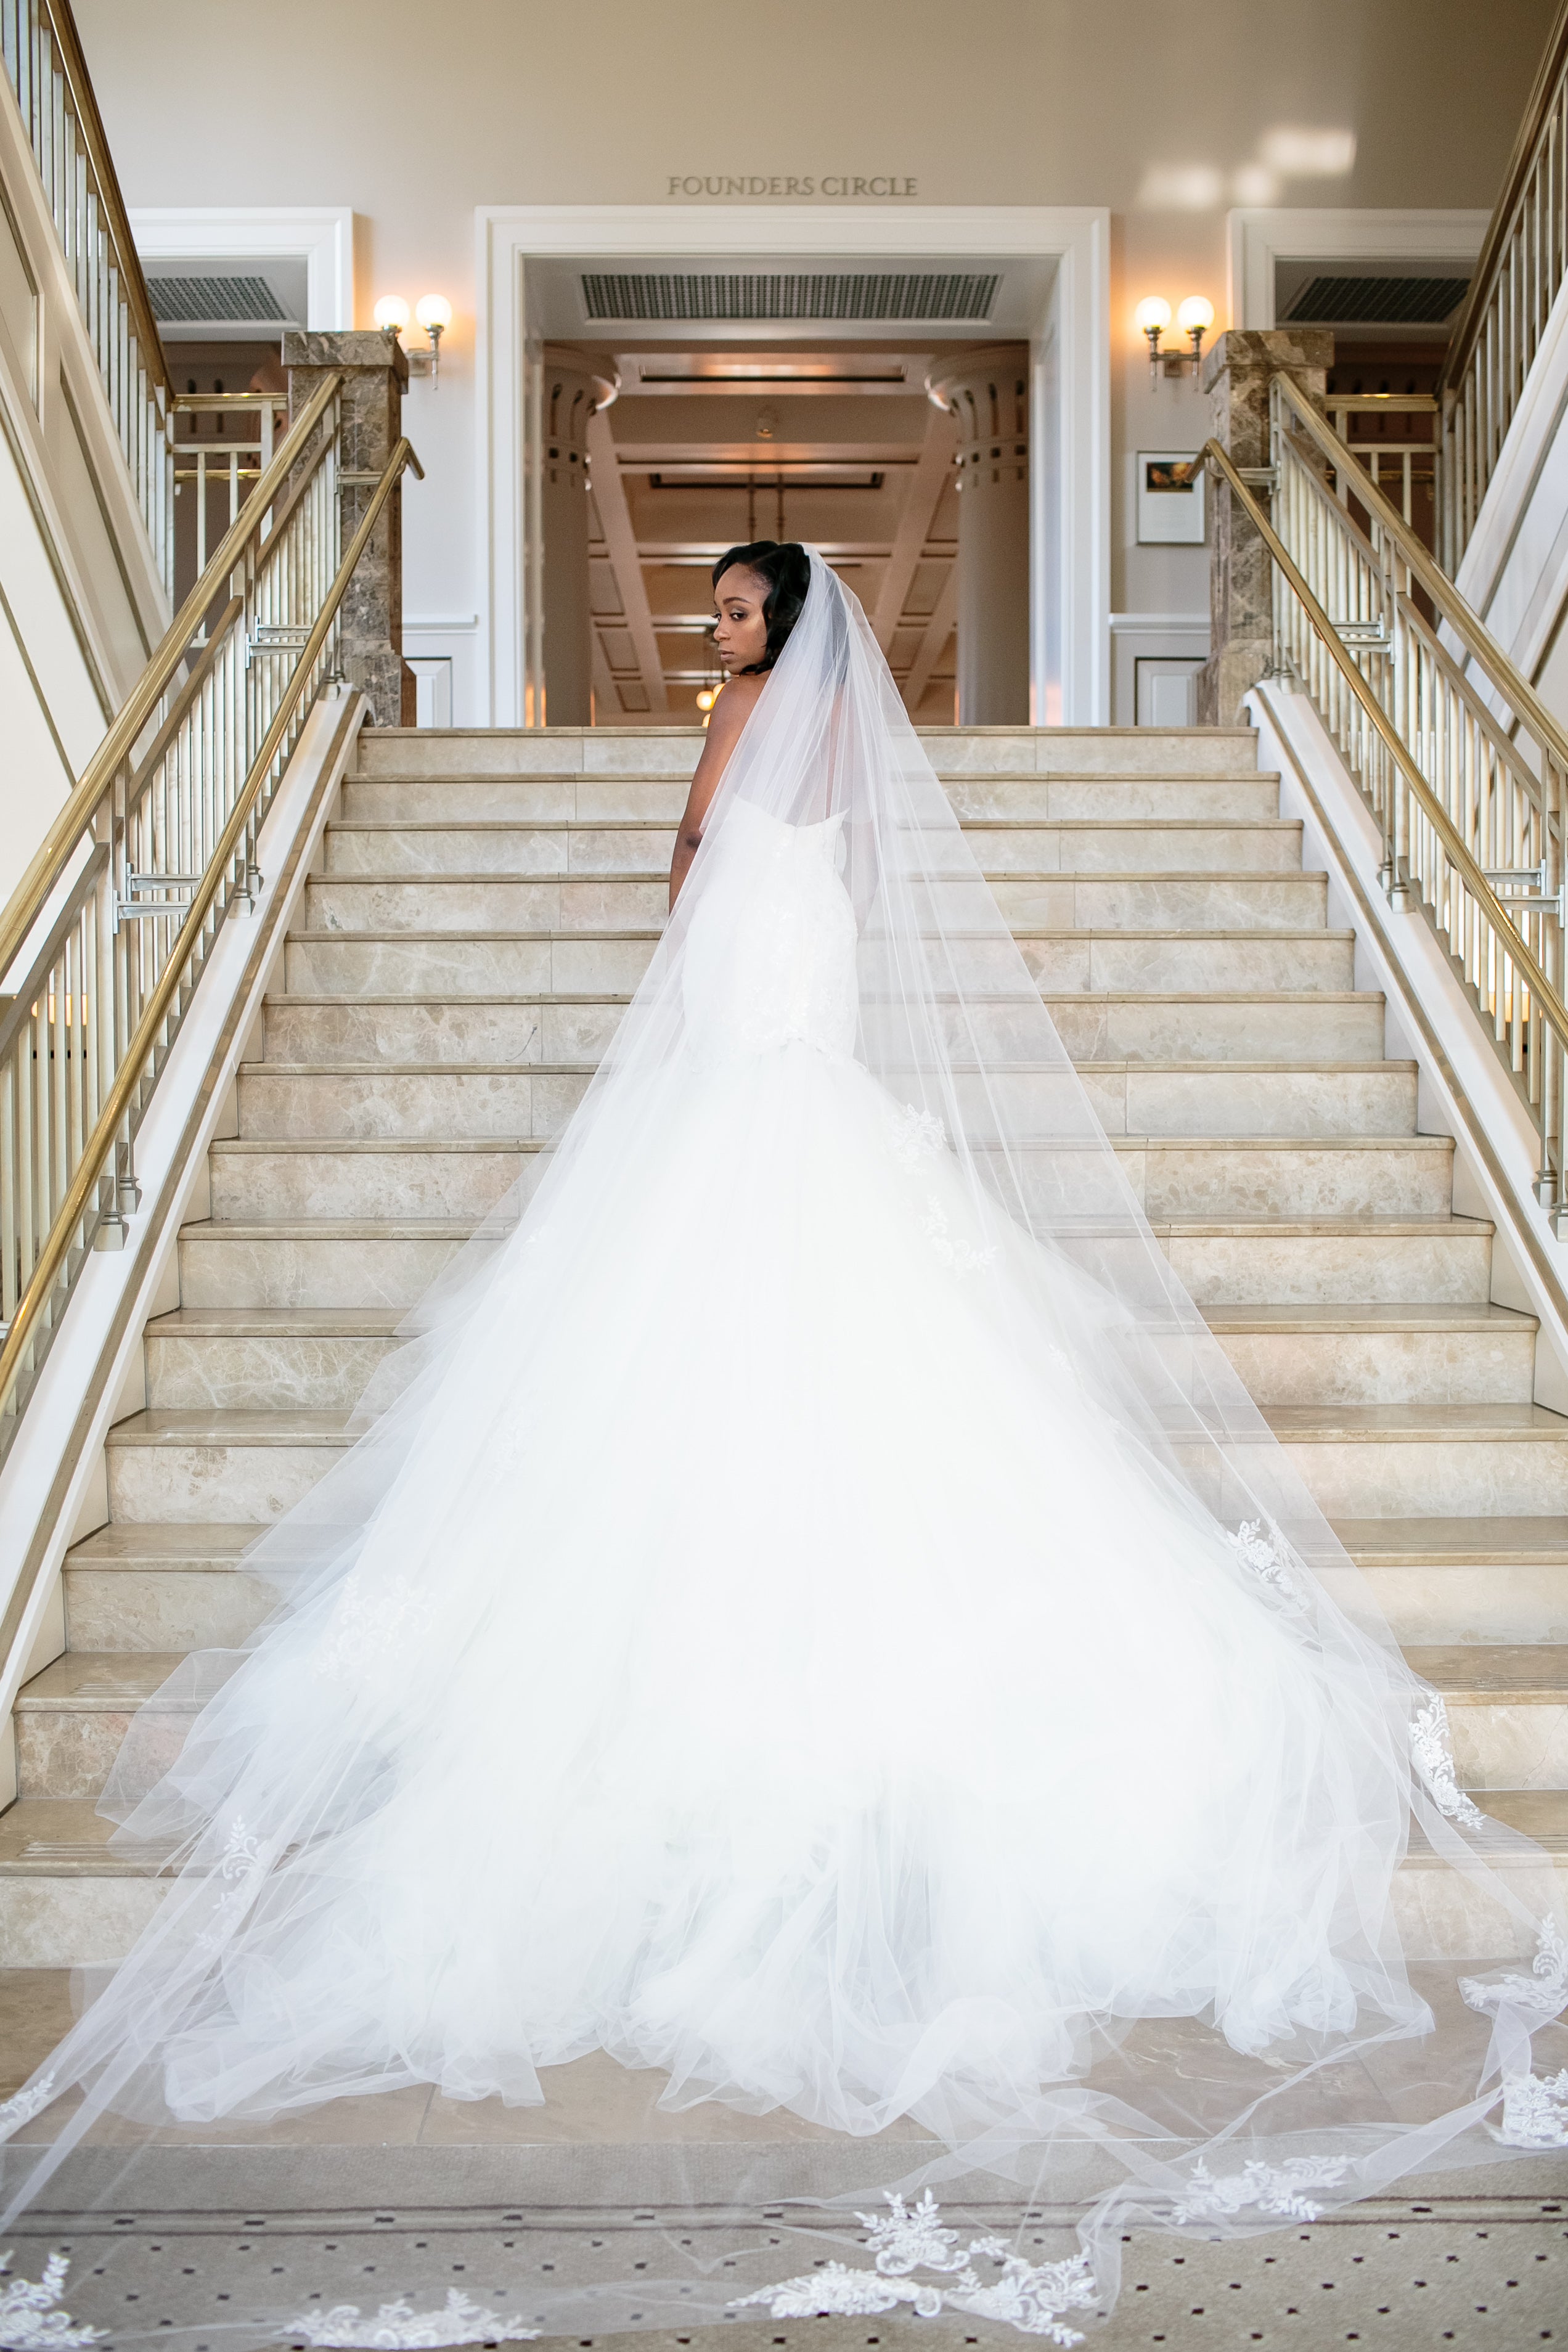 Bridal Bliss: You've Got To See Why We Love Trey And Kristina's Regal And Classic Nashville Wedding
